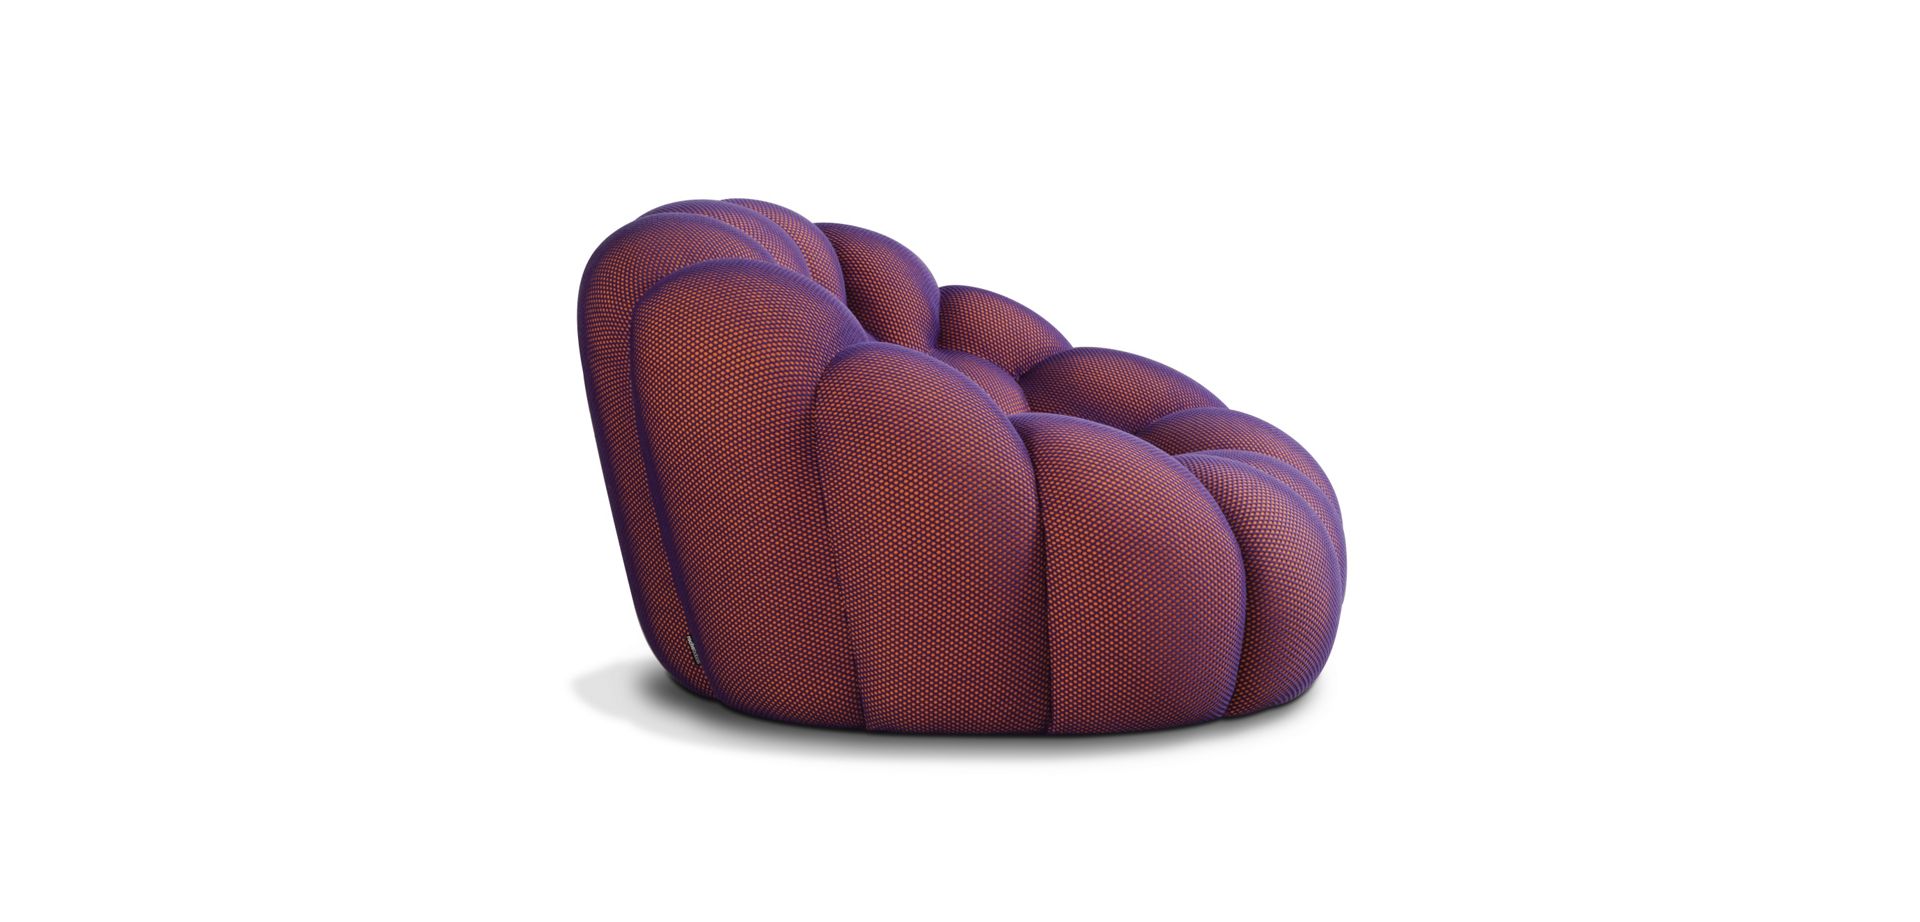 large 3-seat sofa - techno 3D image number 5